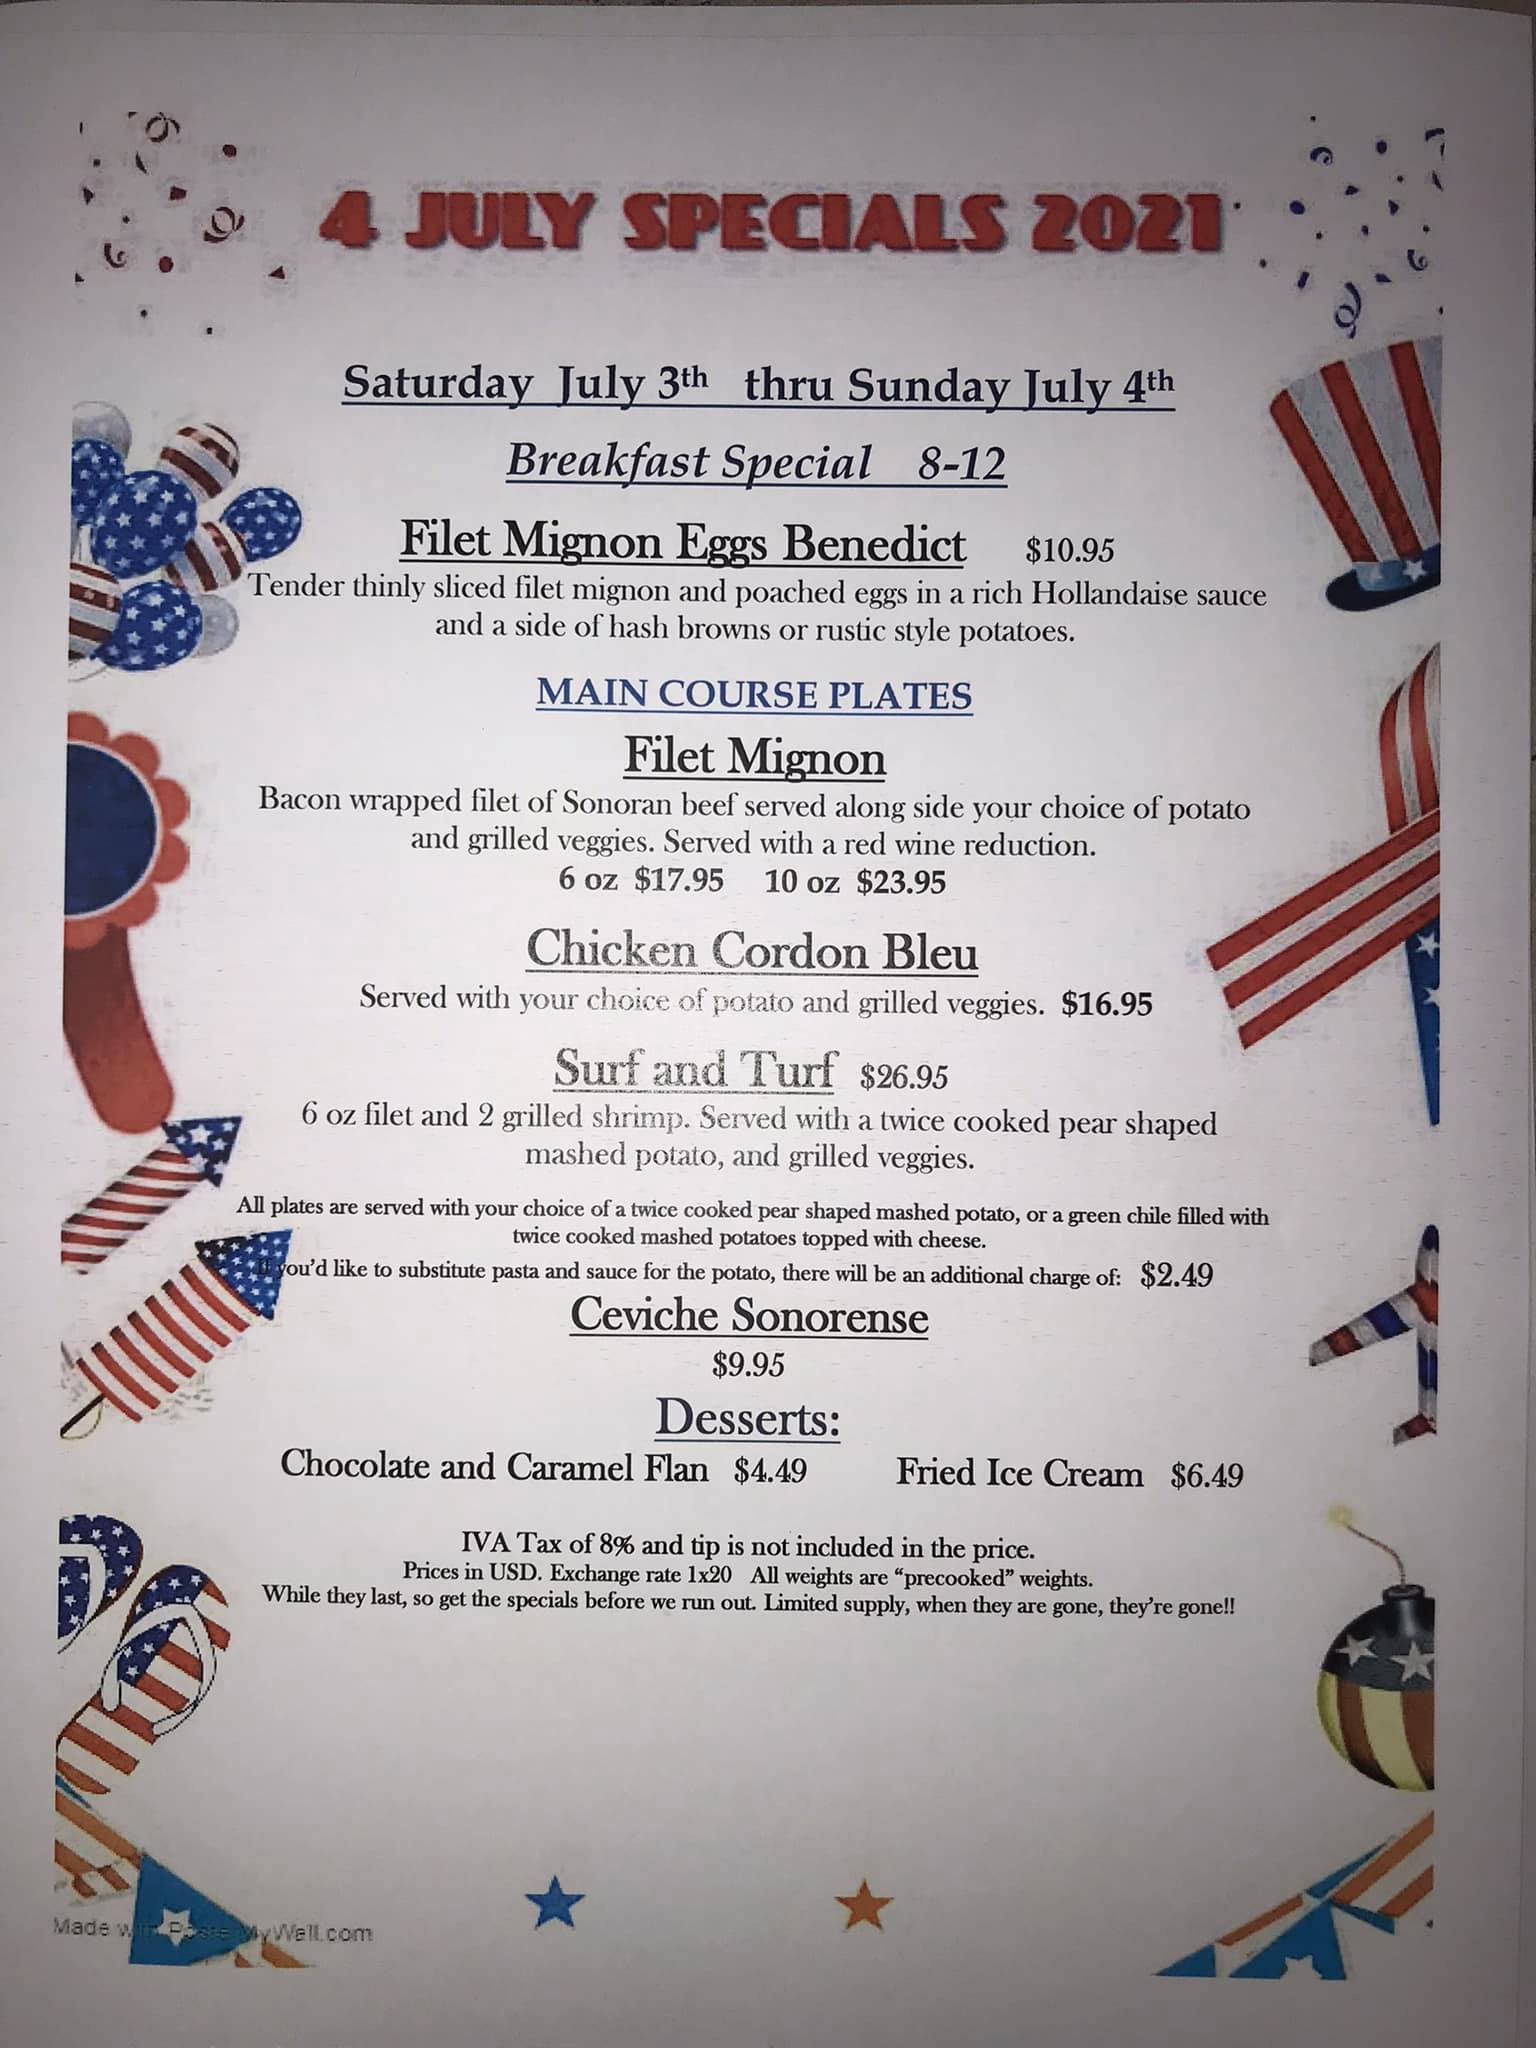 Capones-4th-of-July-Specials Al Capone's Pizzeria 4th of July Specials